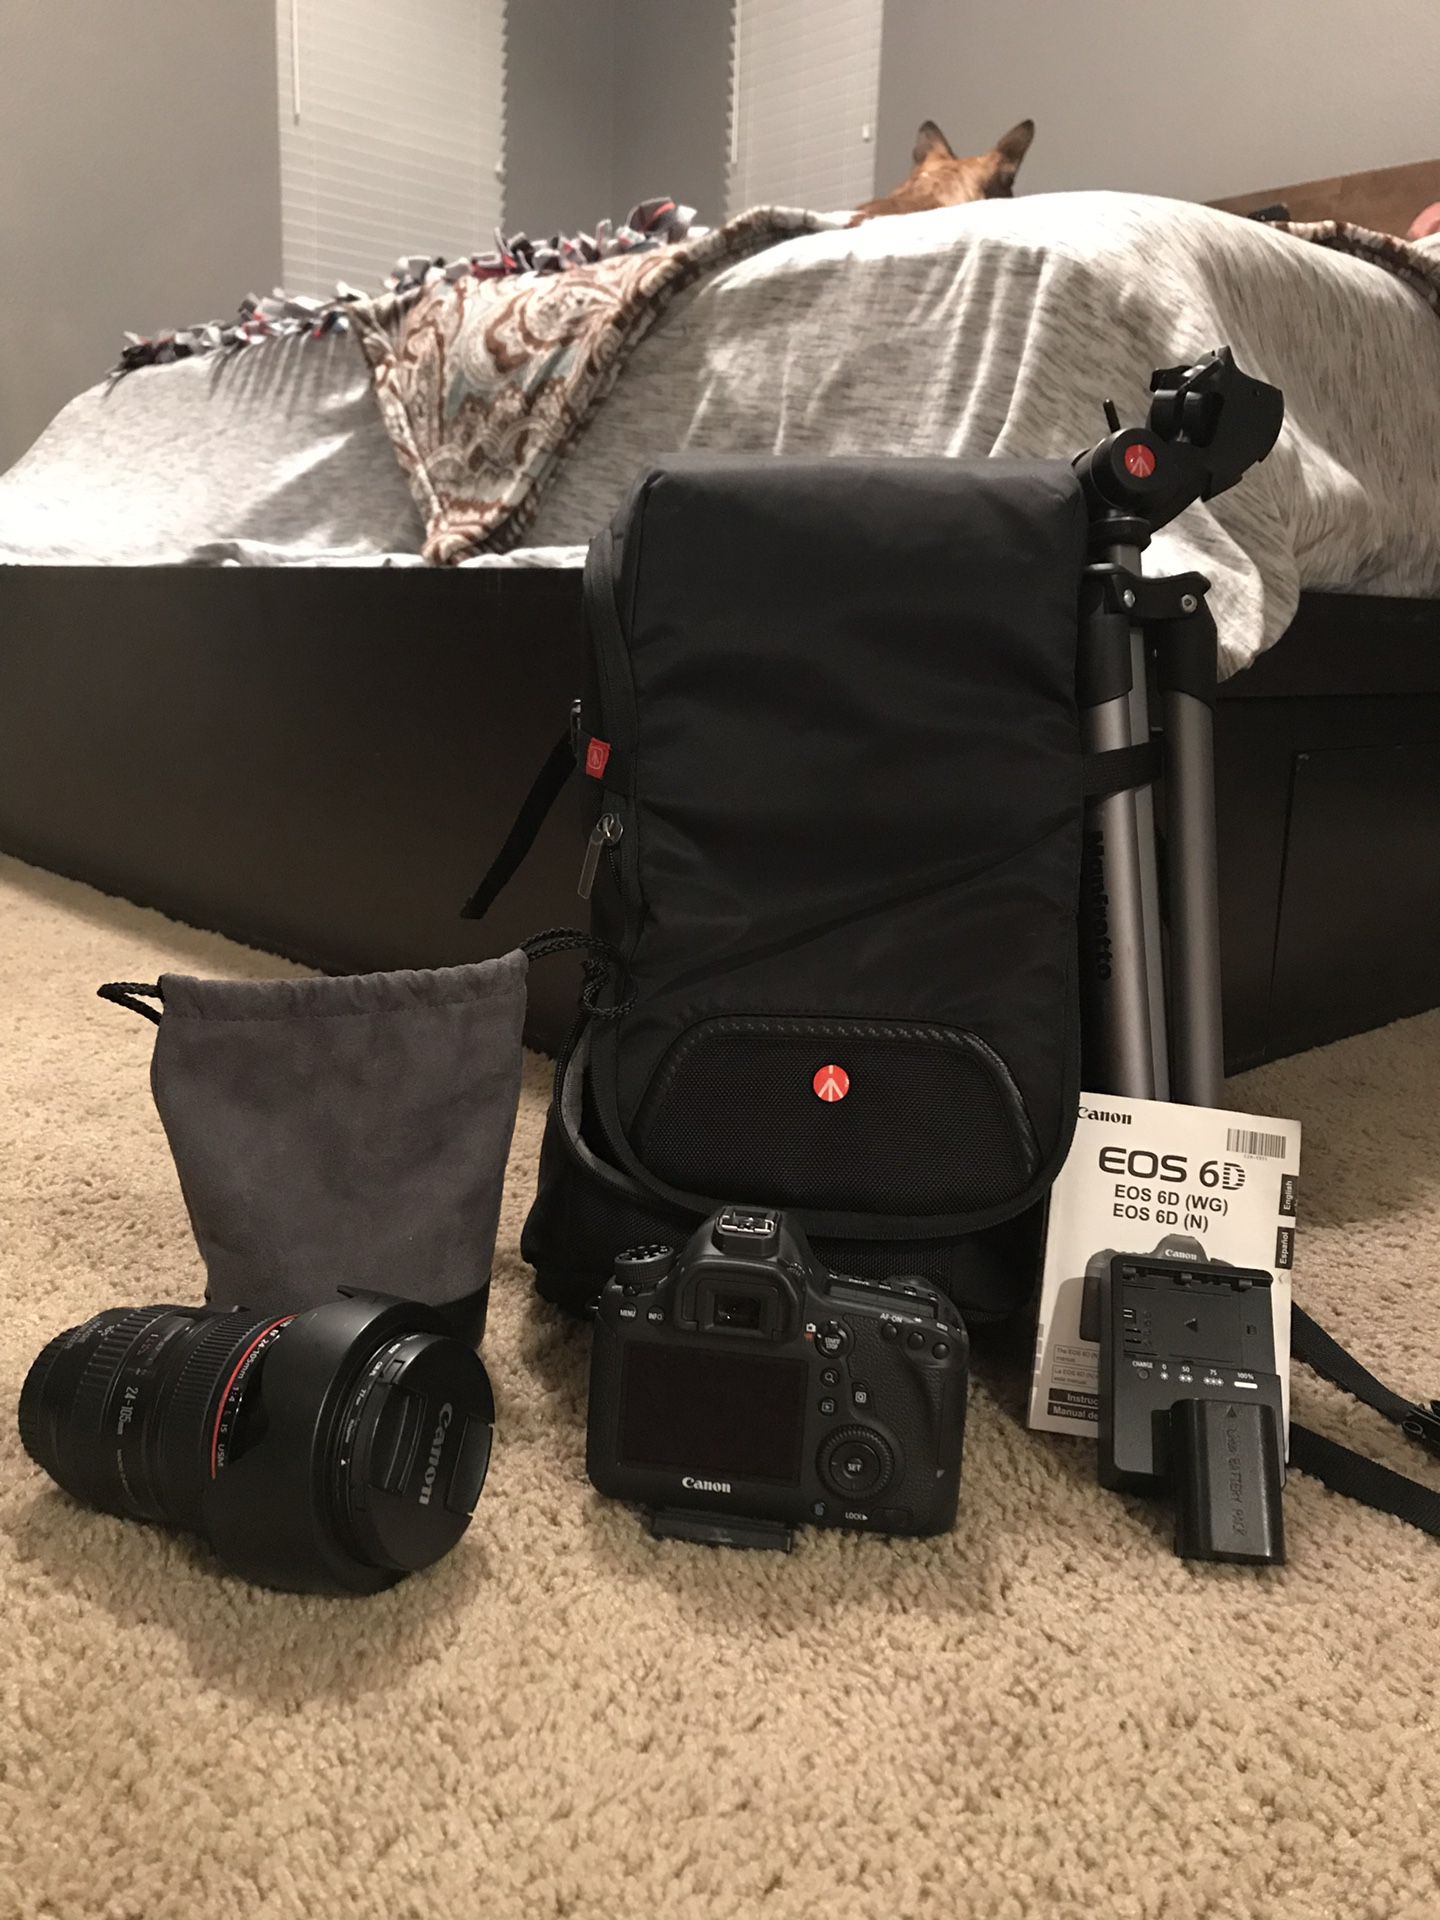 Manfrotto tripod & backpack